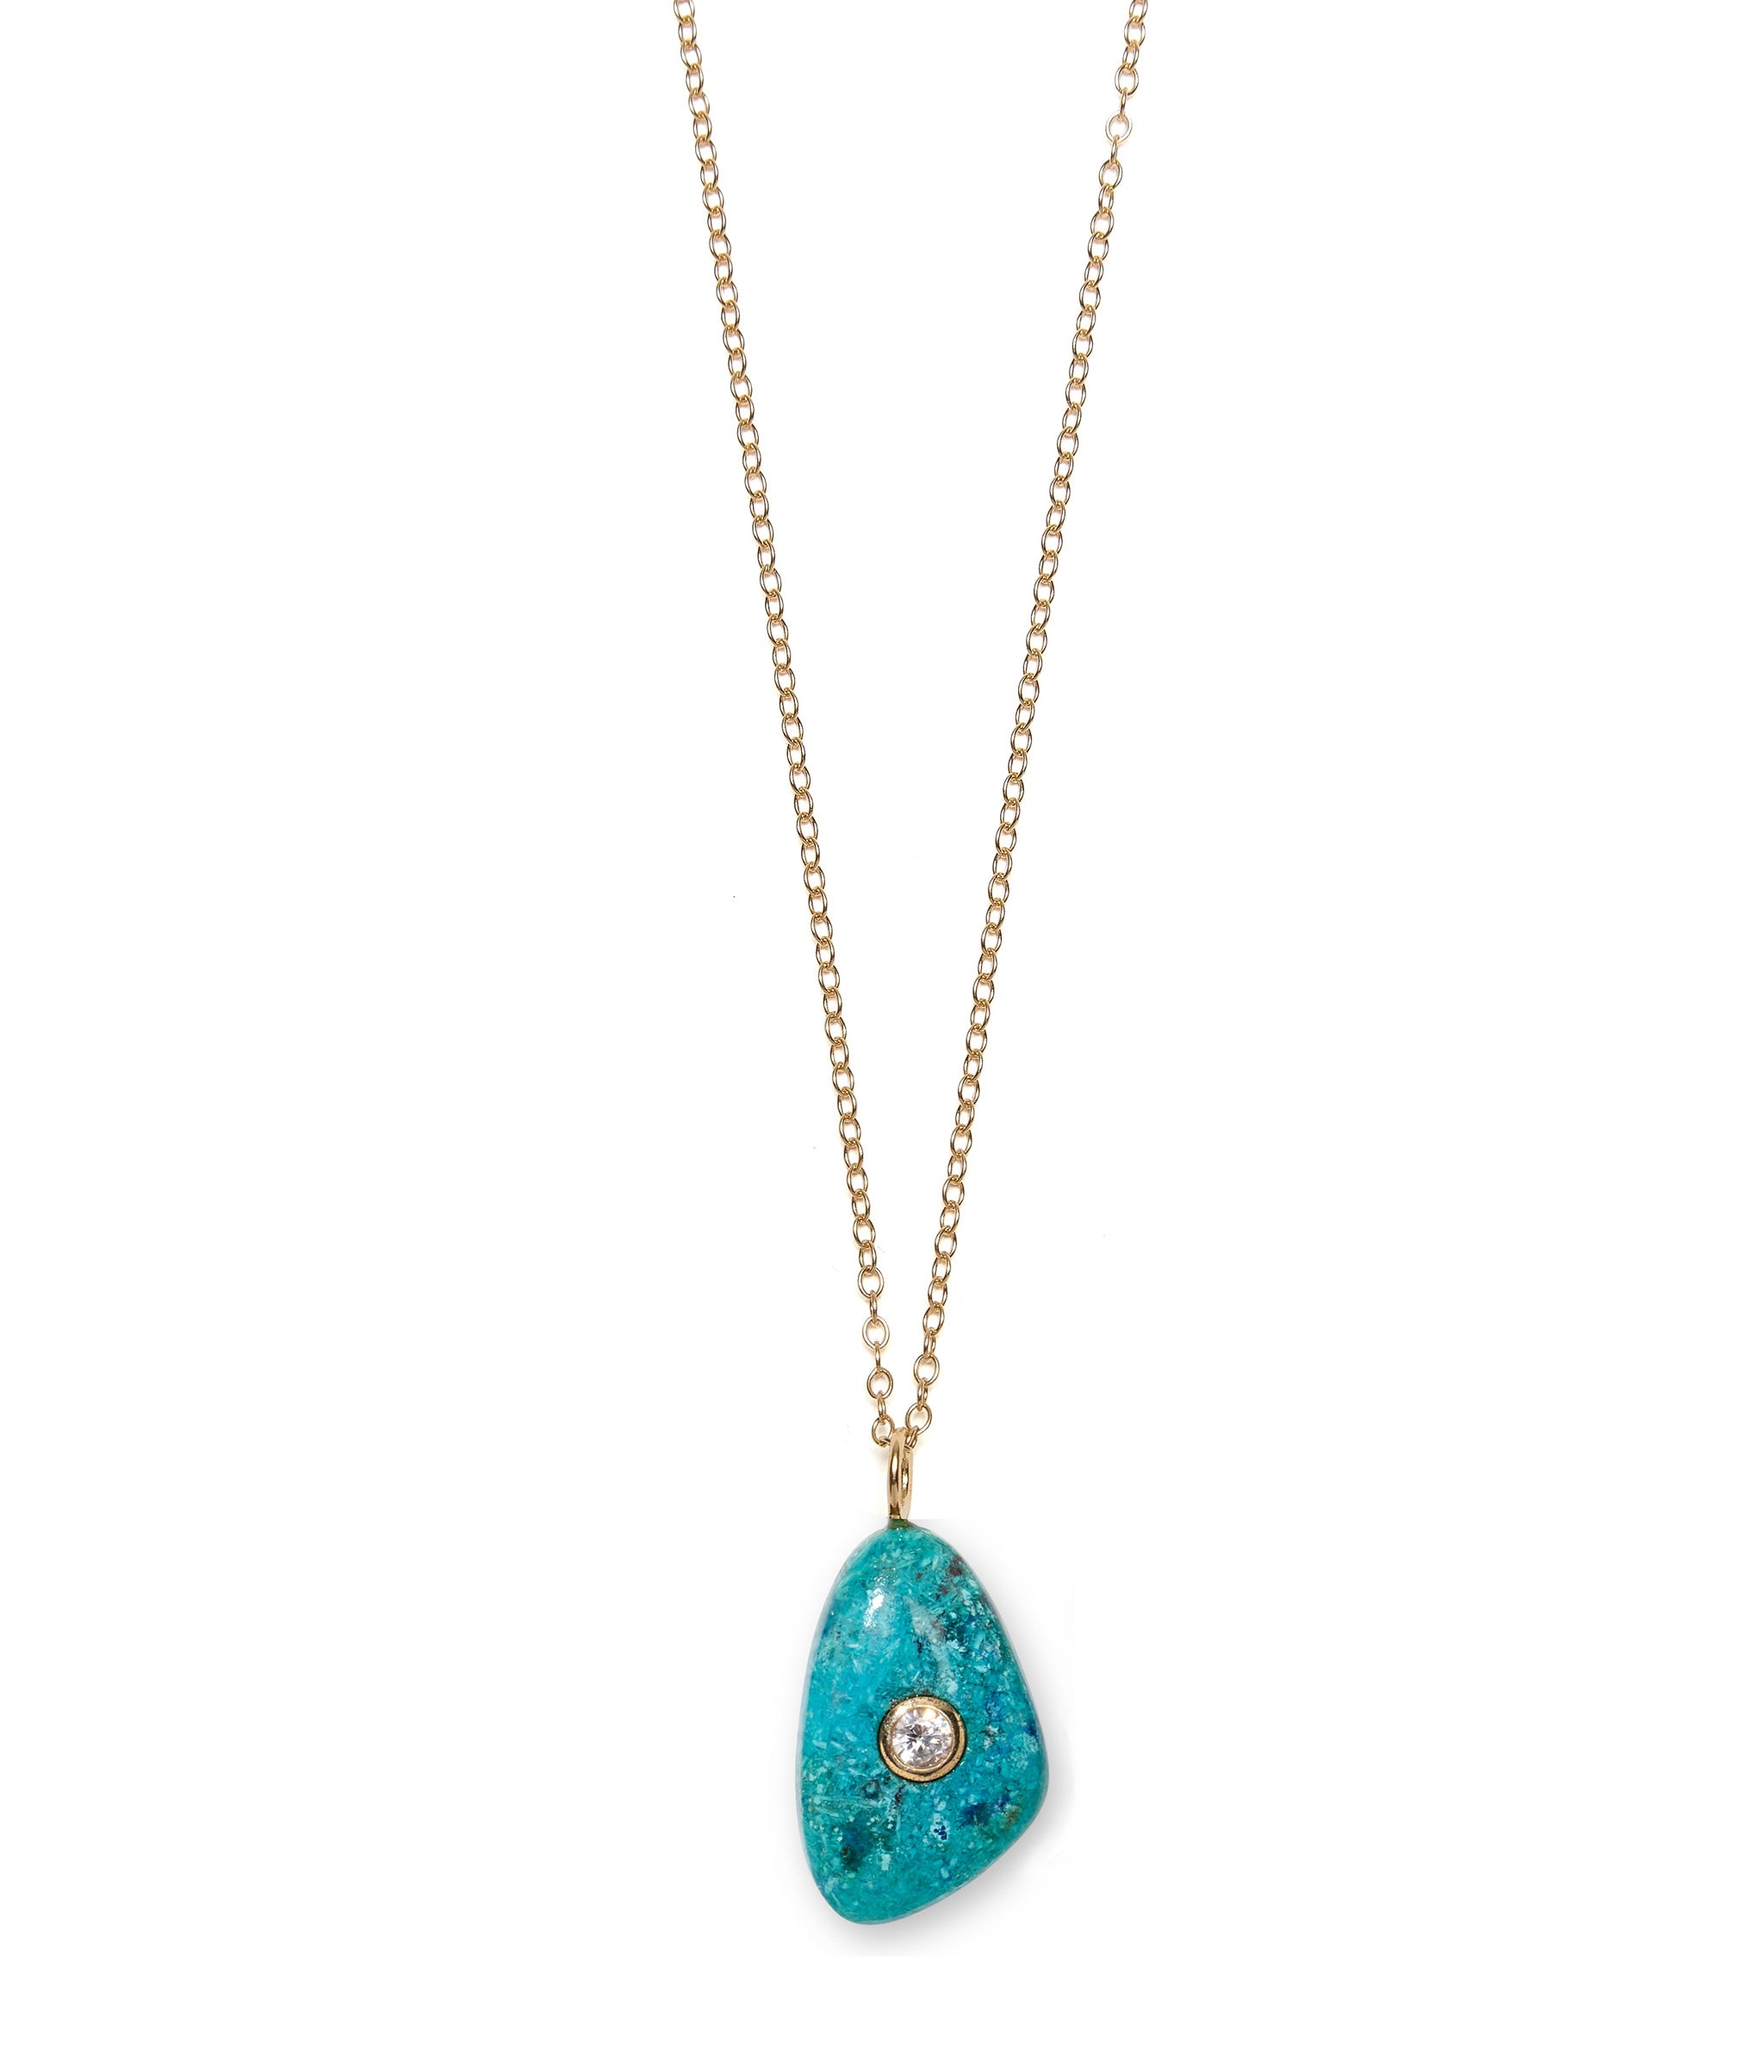  Close-up on gold necklace chain with Shattuckite & Diamond 14k Gold Teardrop Charm